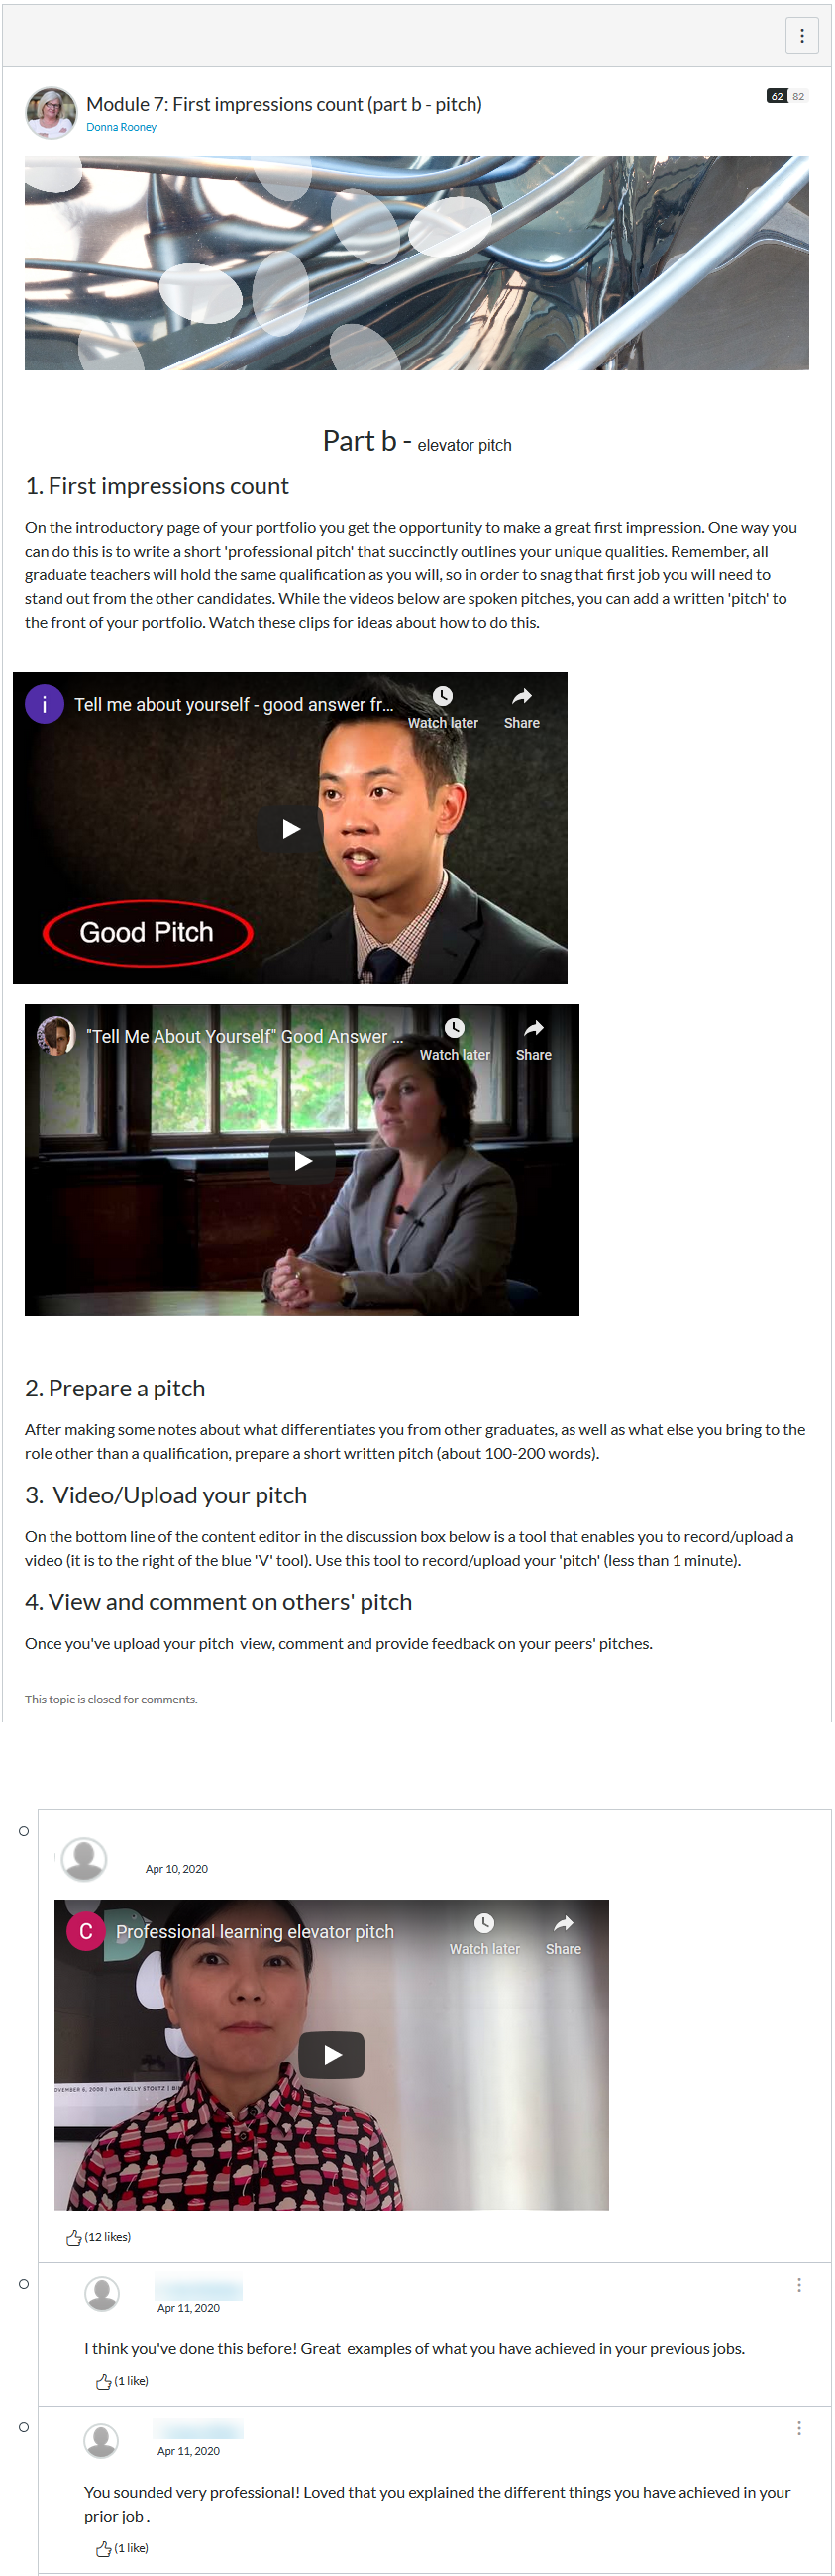 An elevator pitch activity set within a Canvas module. Context and instructions are given for students to create their own pitch which they can upload to on the bottom of the page.